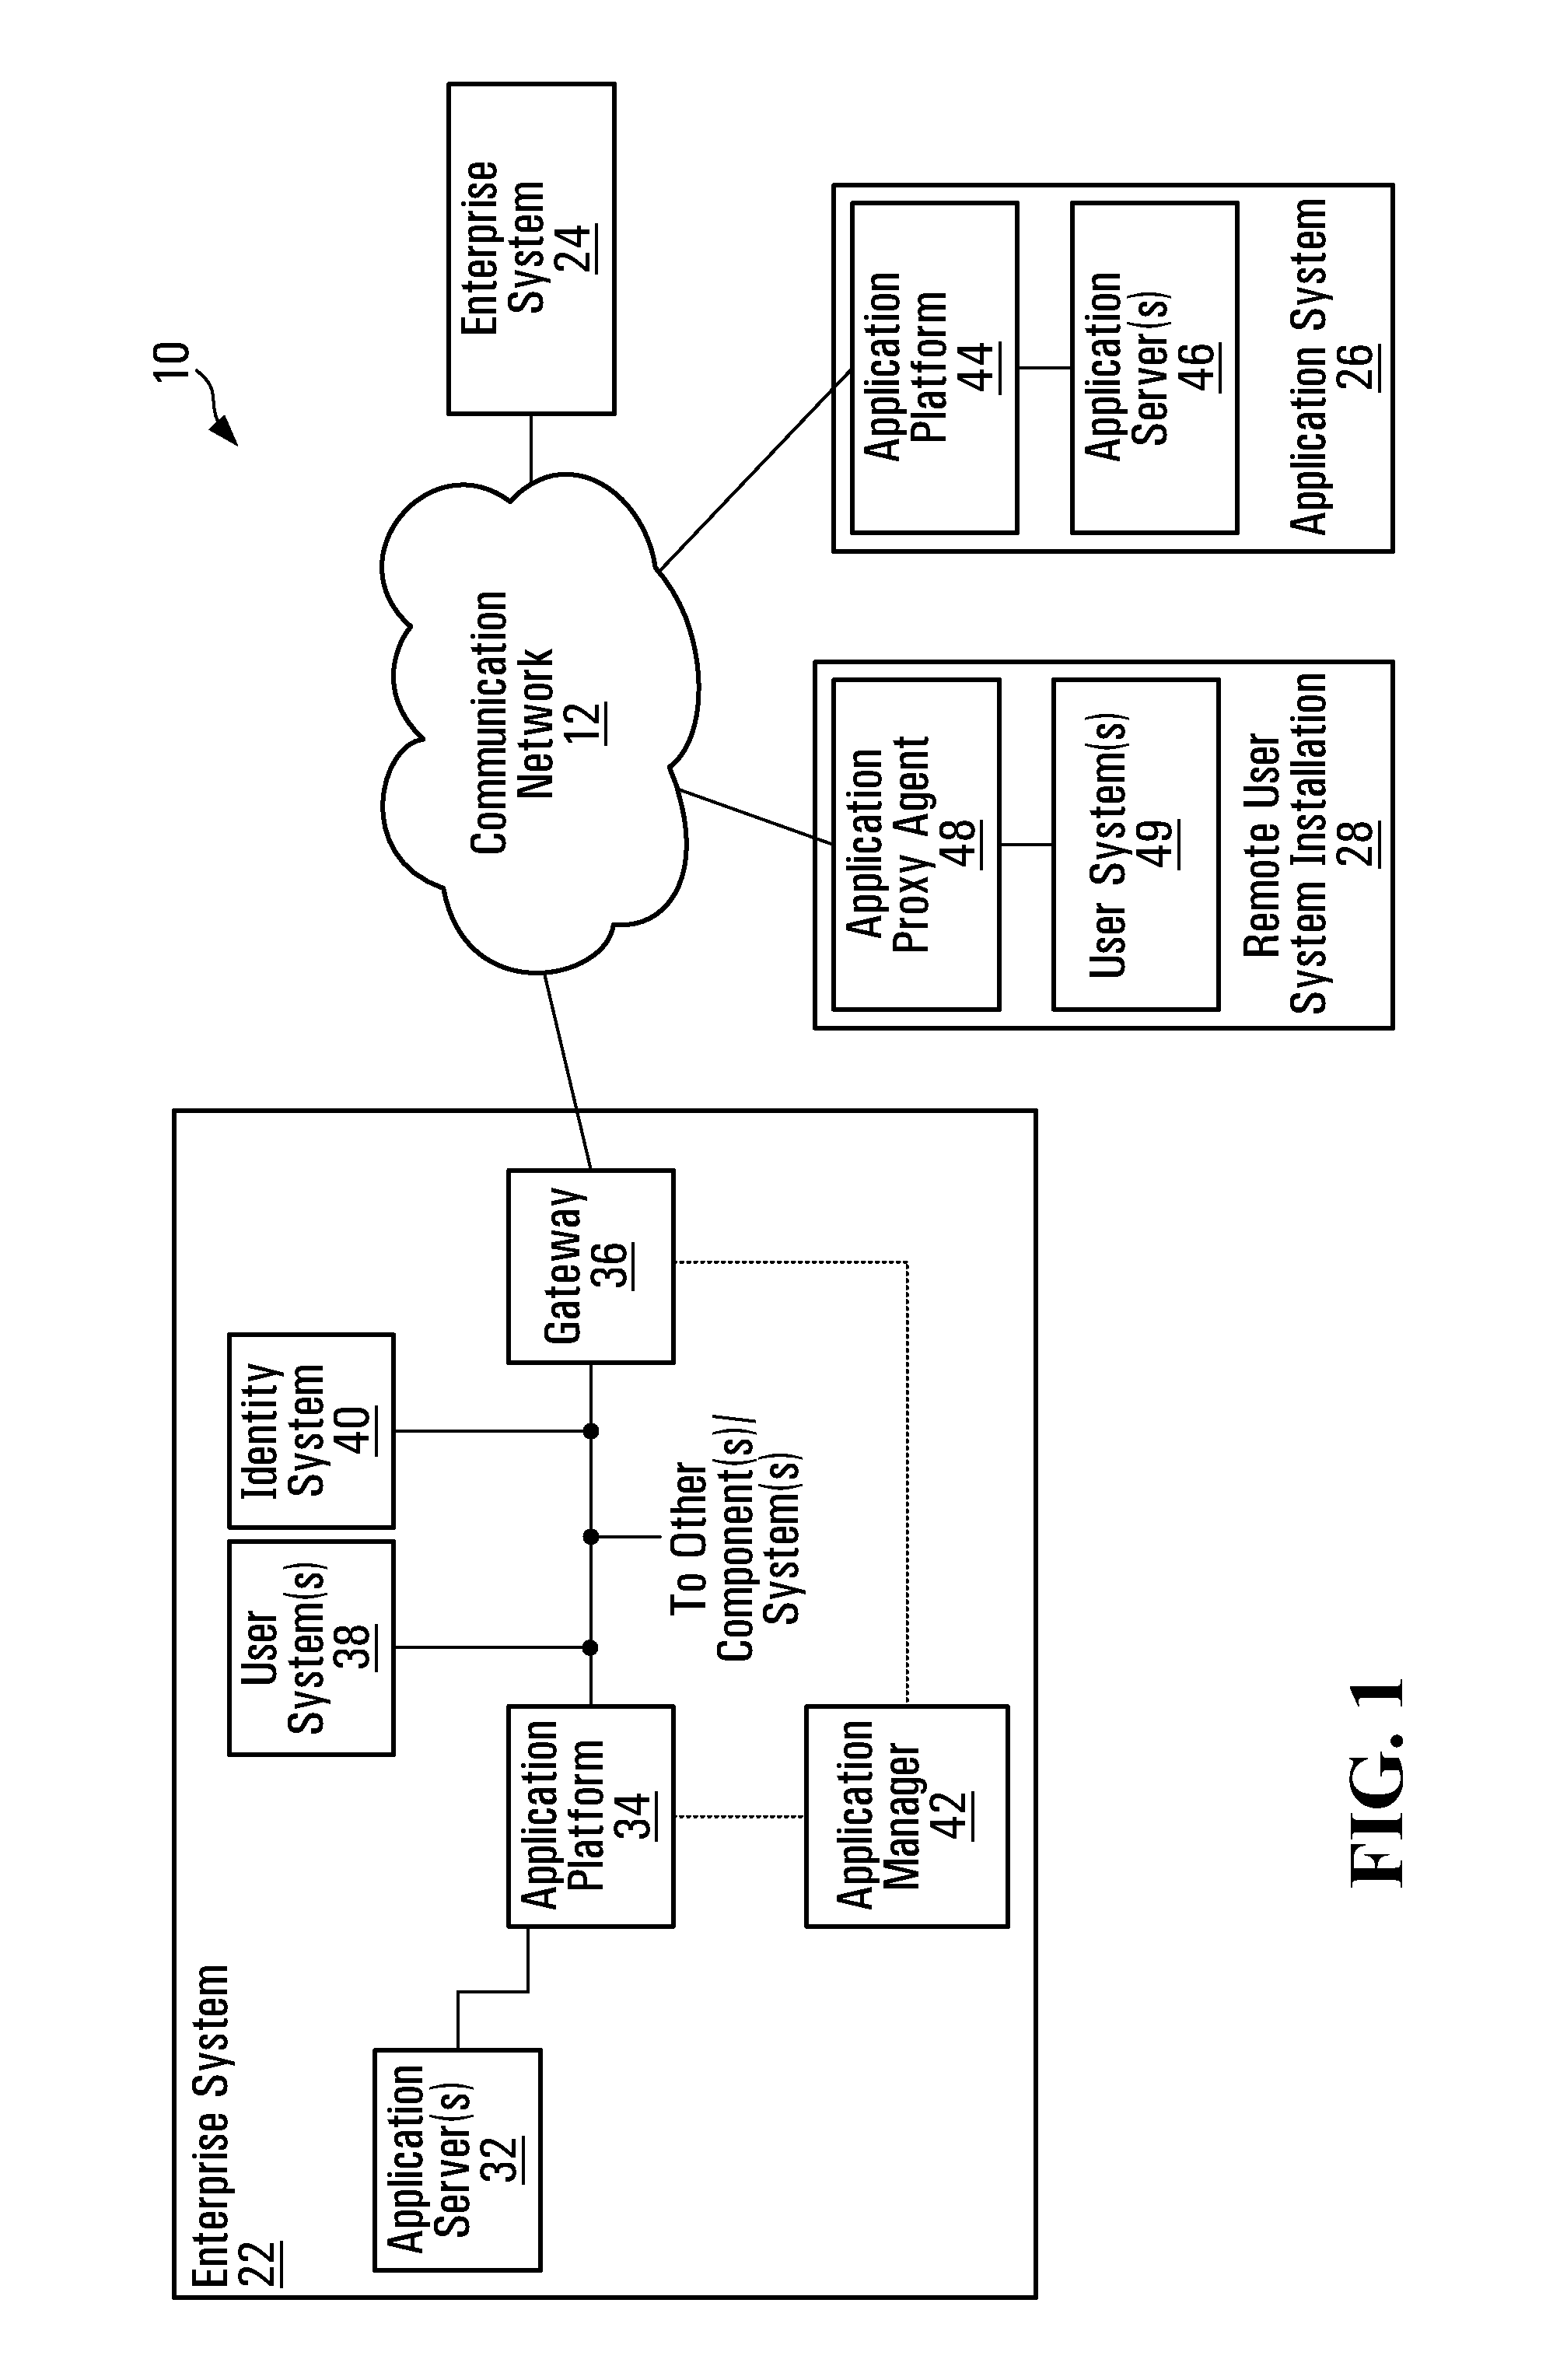 Communication network application activity monitoring and control